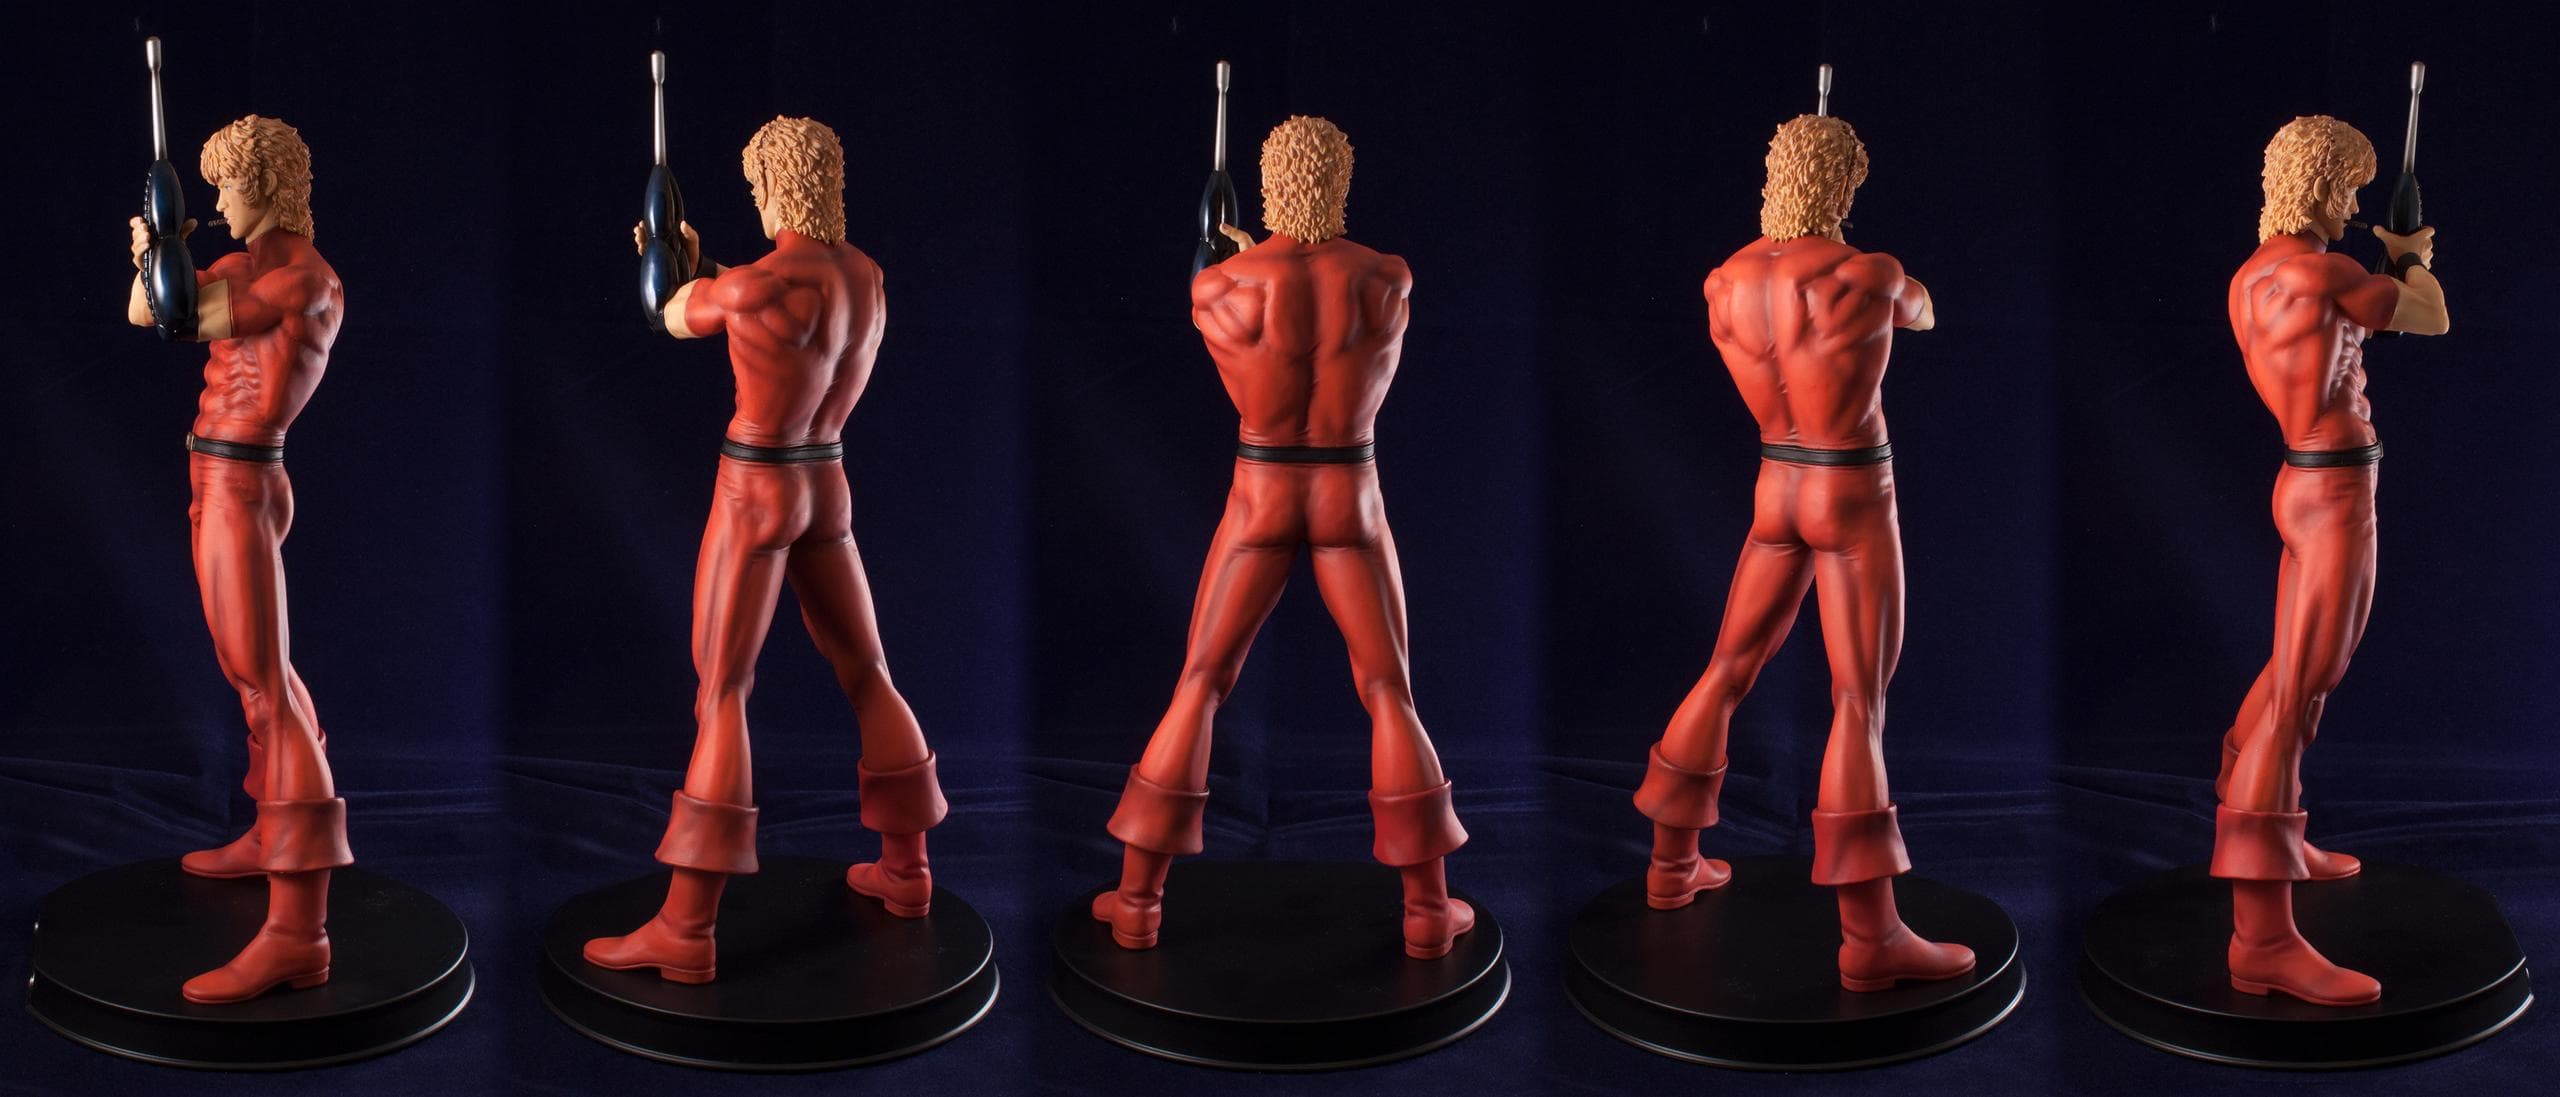 Some shots from the back. Honestly, I get the feeling that the person who sculpted this figure was a fan of certain artist from Finland.